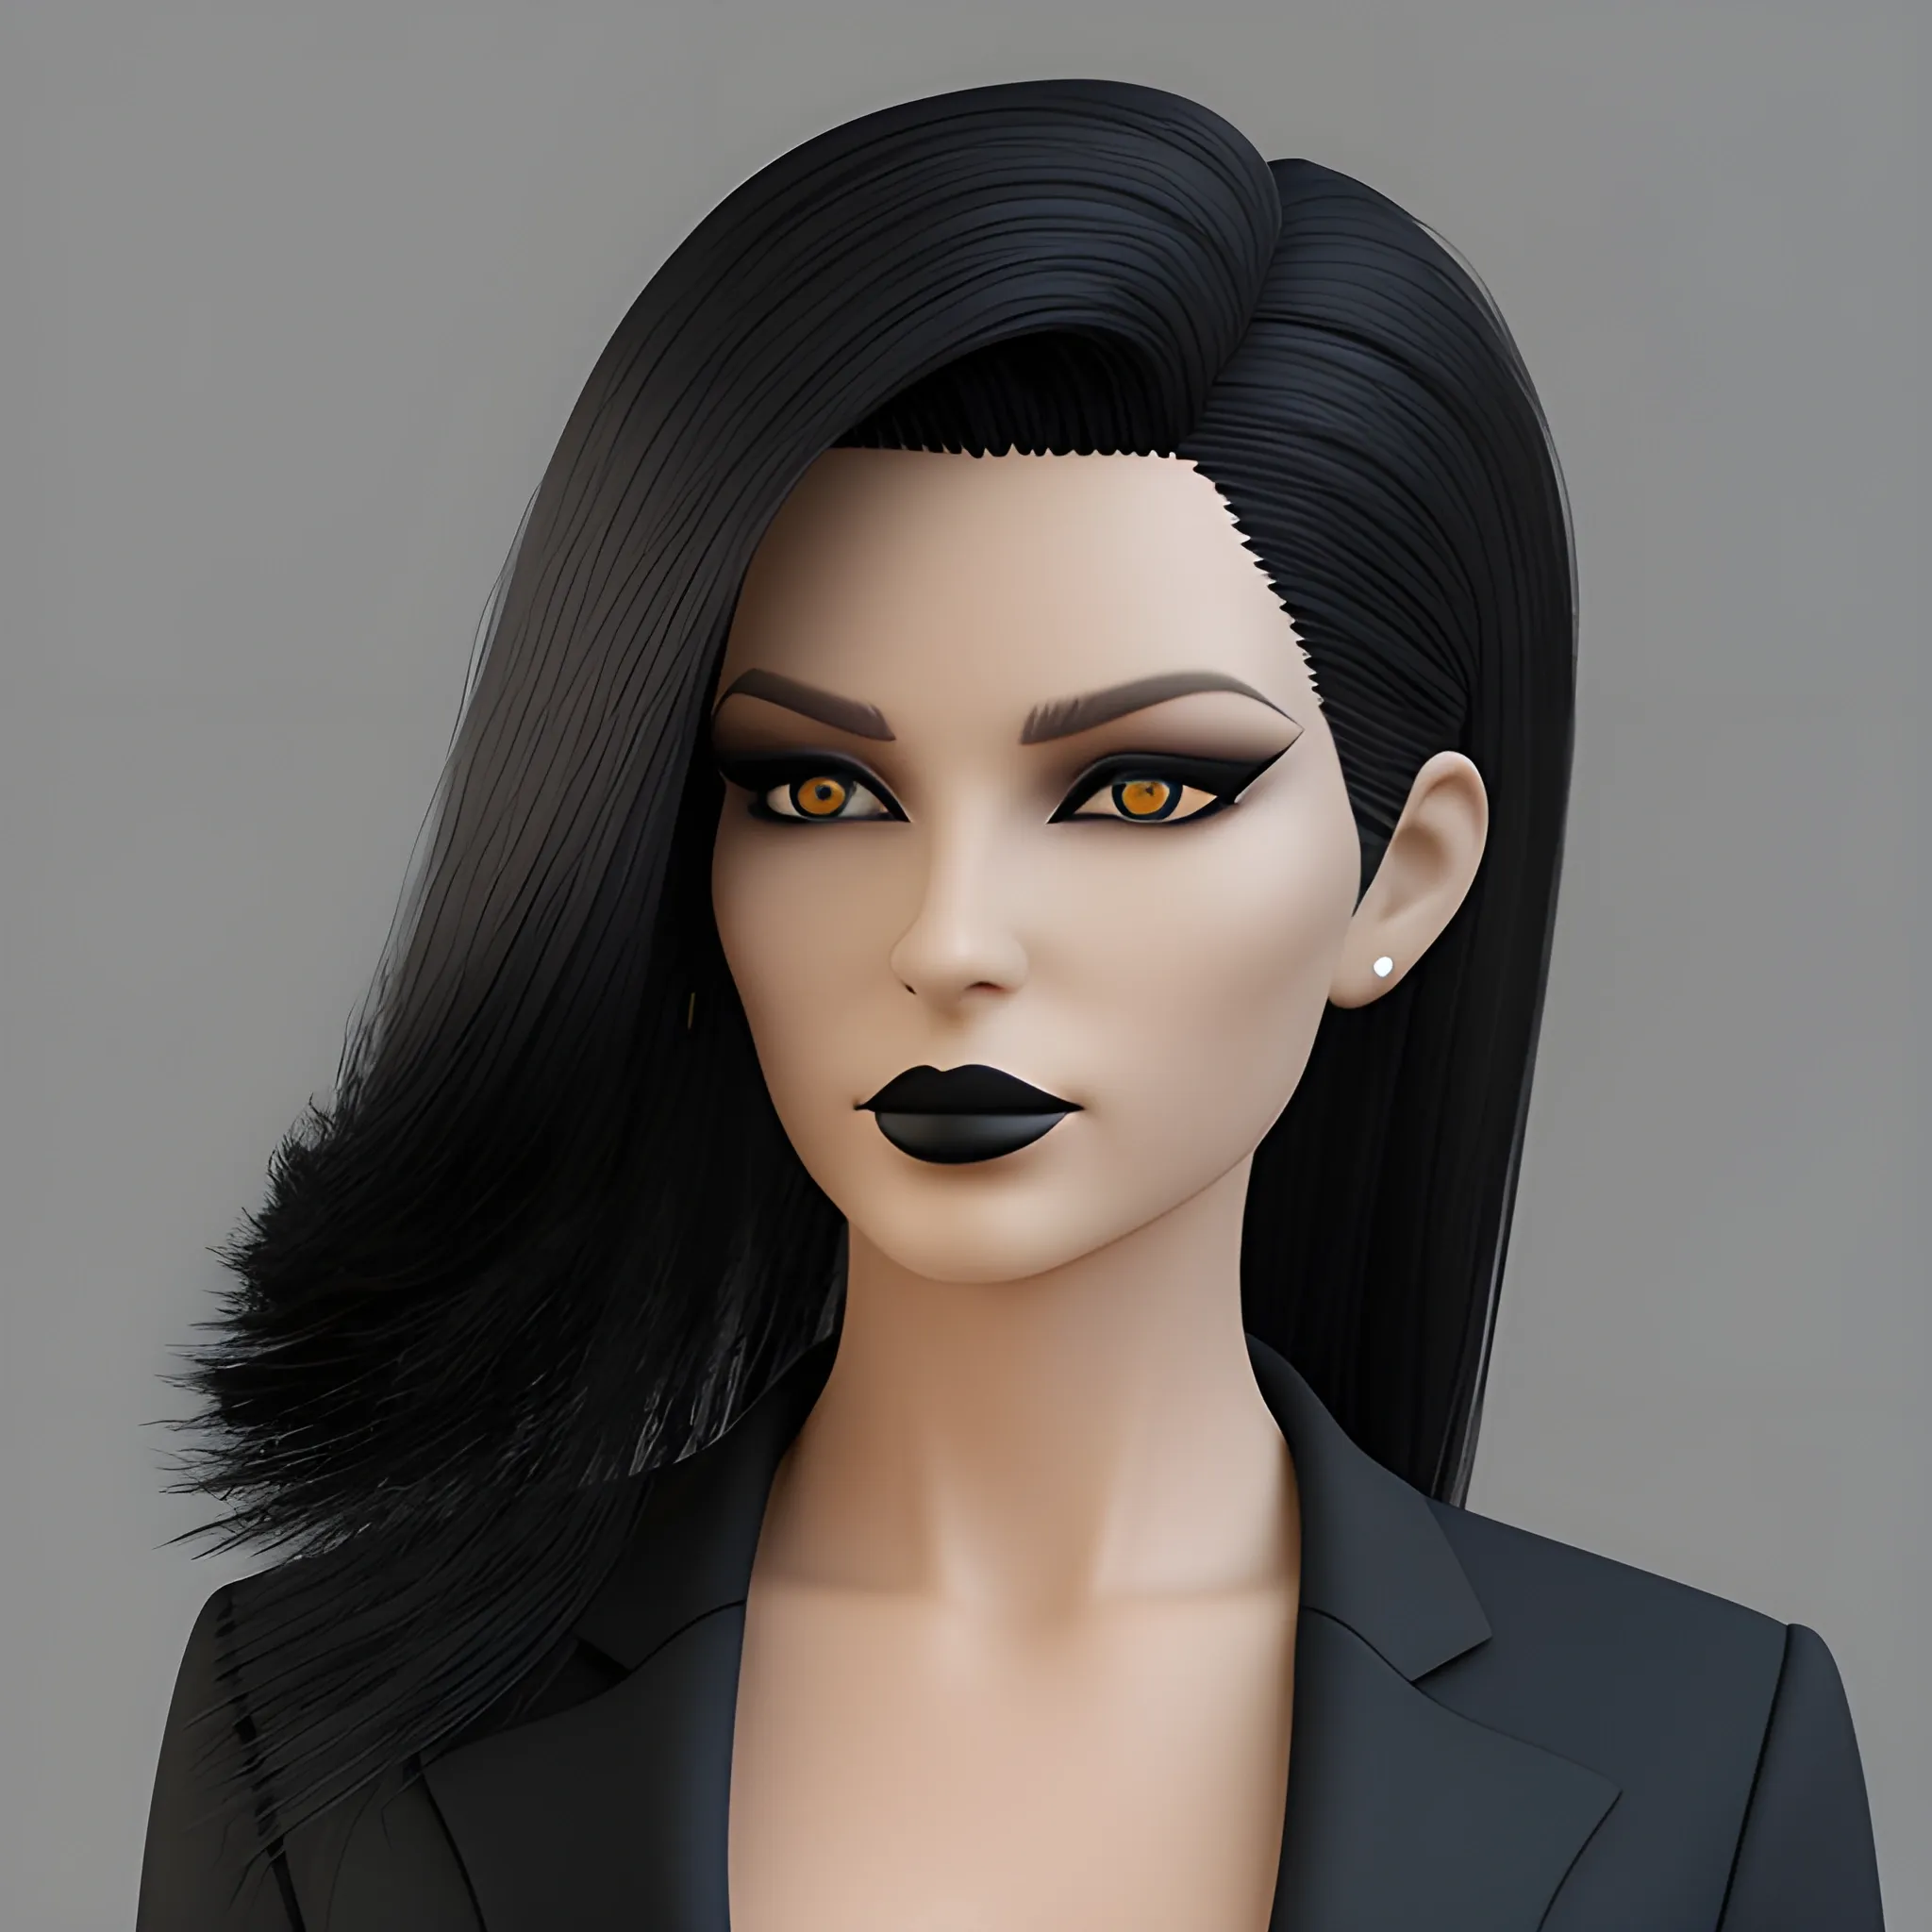 Beautiful Black shoulder length haired business woman with black lipstick and eye makeup dressed in an all black business suit posing standing photo realistic 24k ultra realistic quality 3D no deformation